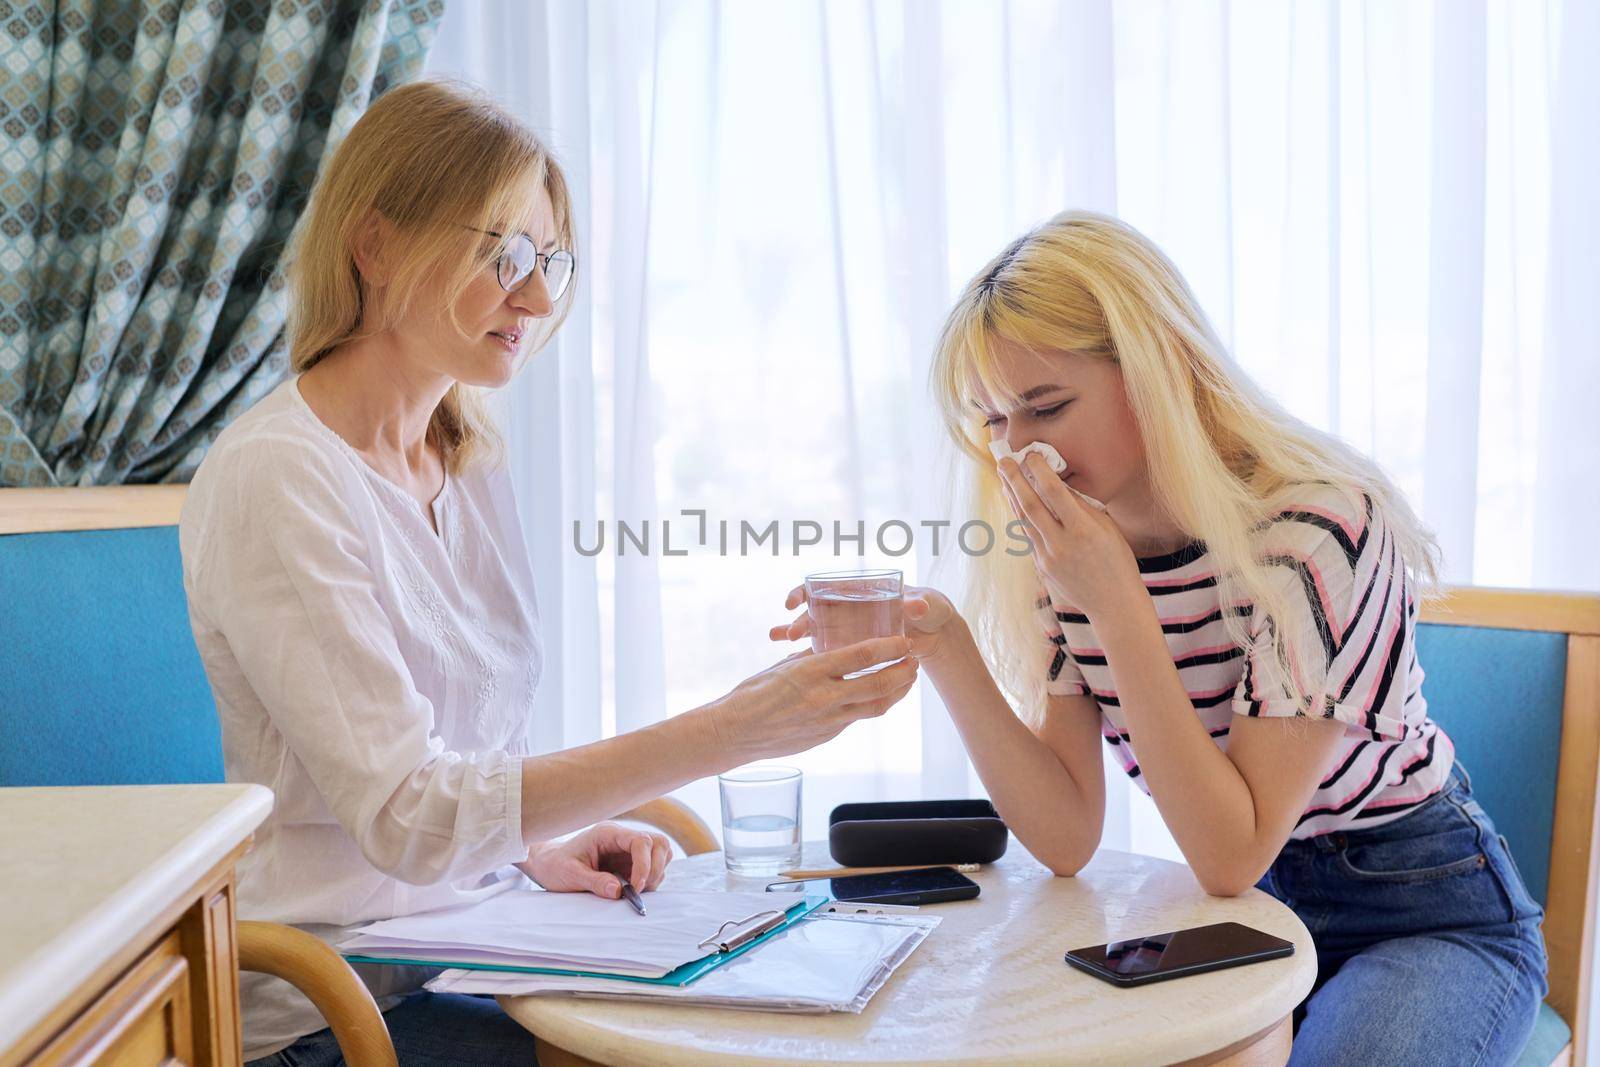 Female psychologist working with sad upset teenage girl, session in office. Adolescent depression, adolescent mental difficulties, professional psychological assistance, therapy, psychology